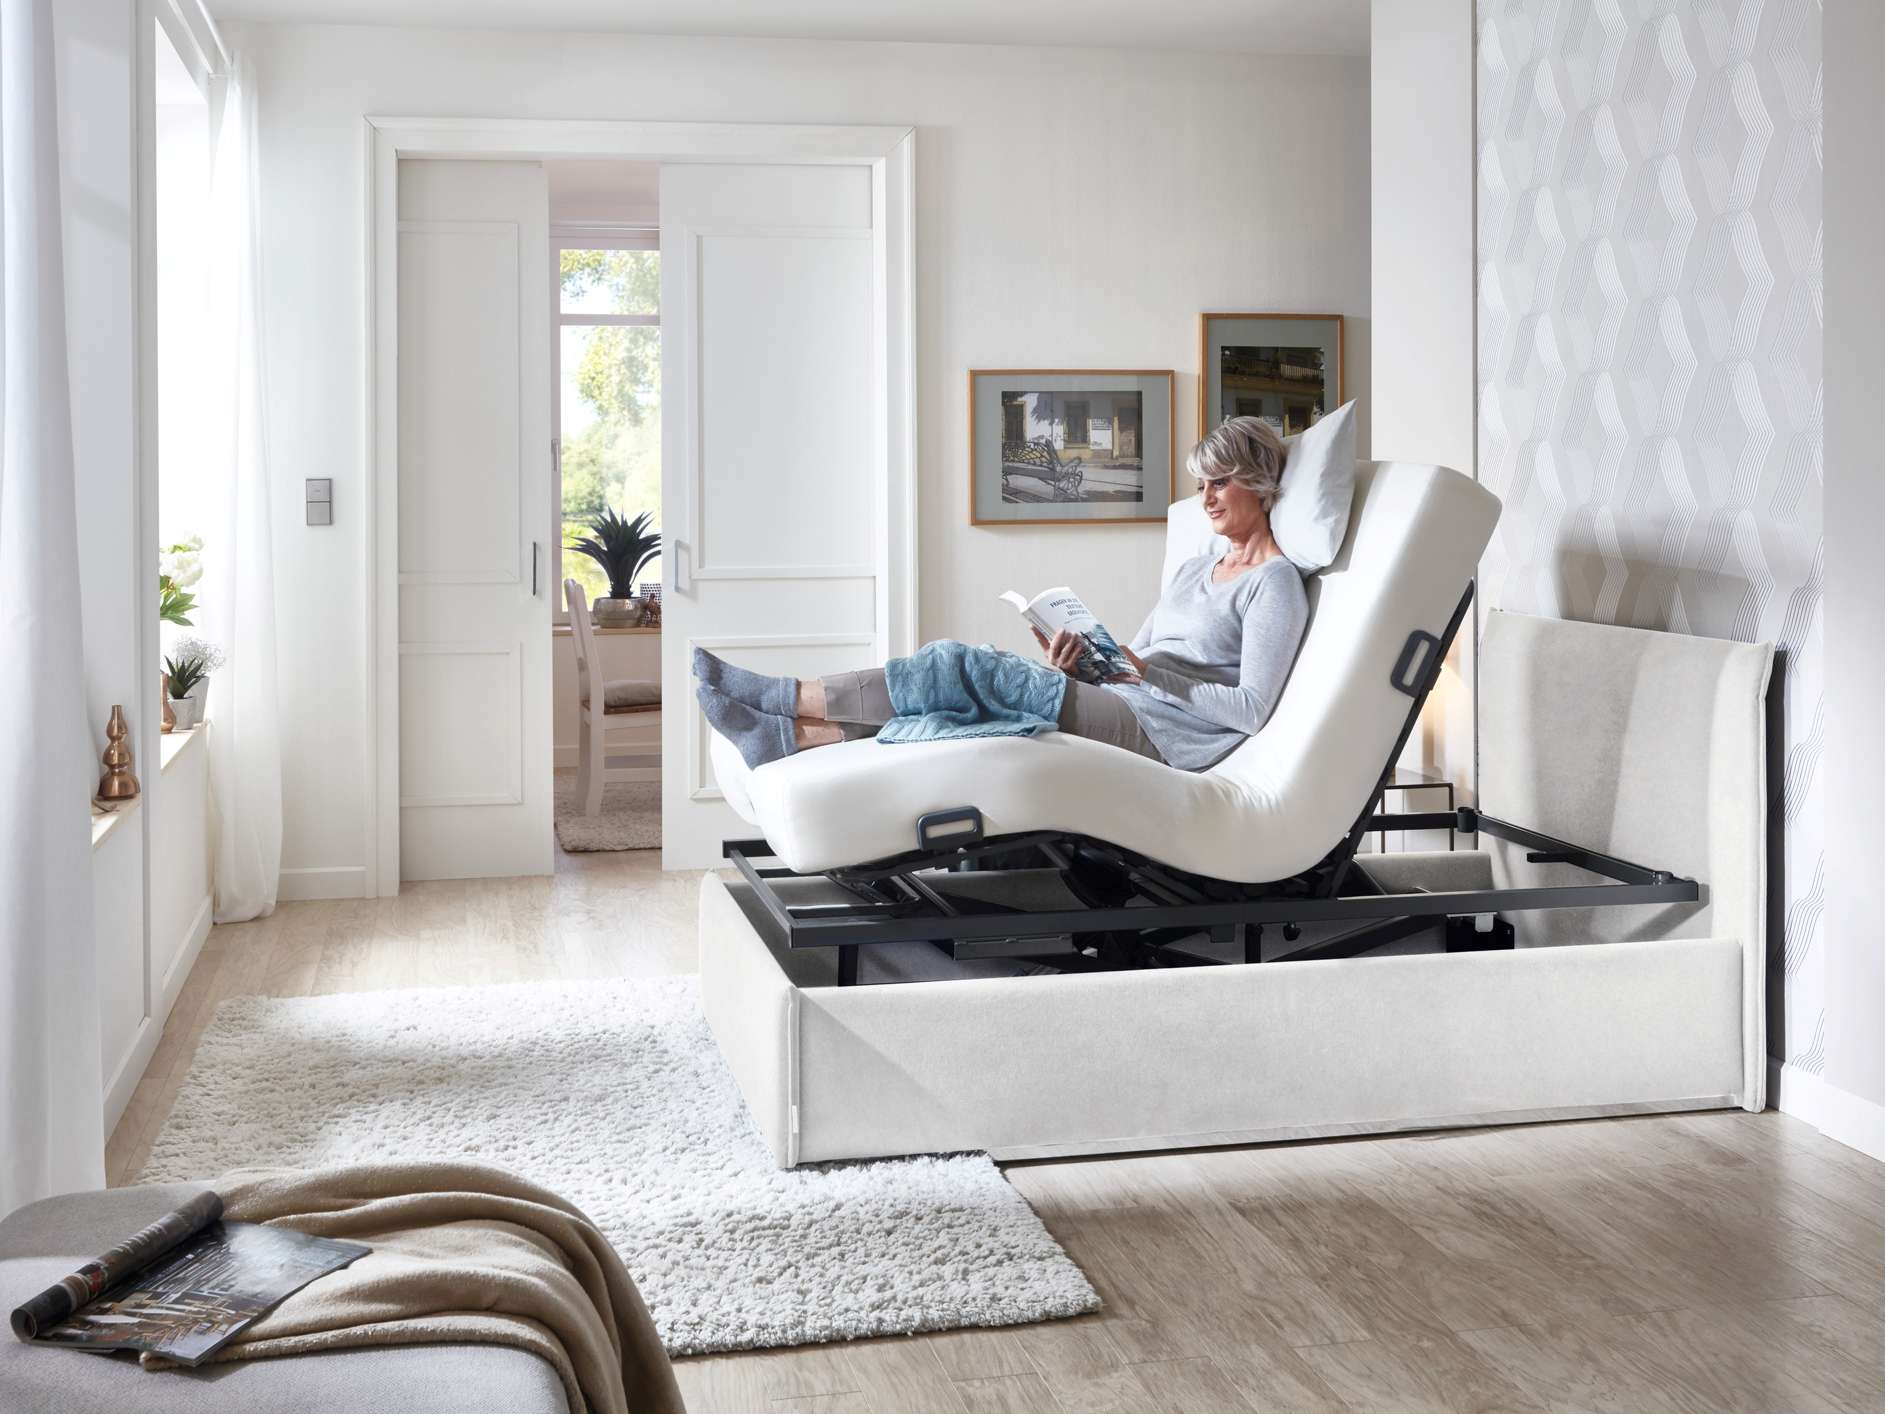 Comfort frame Lindeo in the sitting position